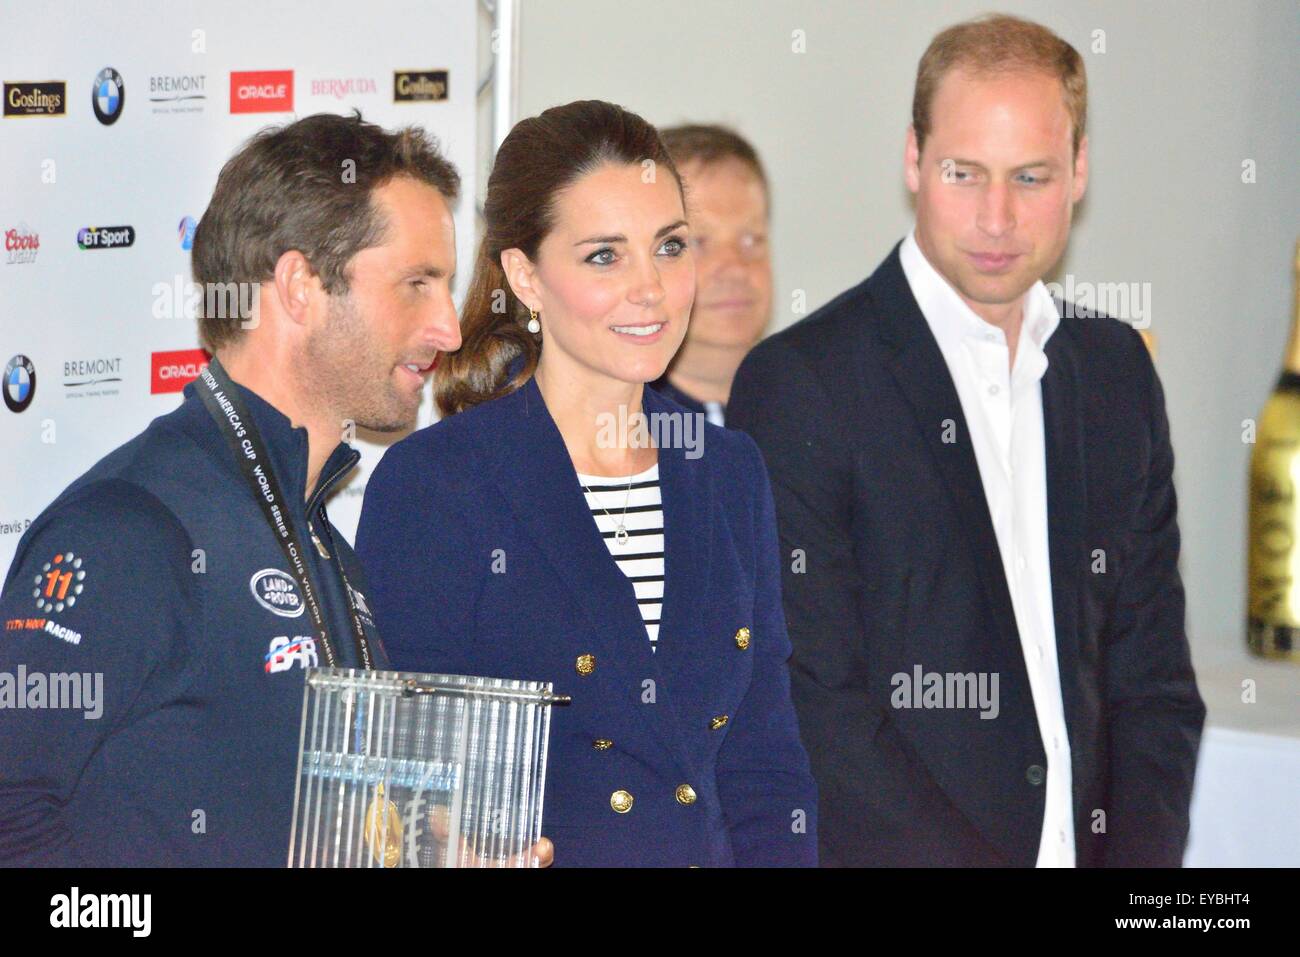 Portsmouth, Hampshire, UK. 26th July, 2015. The Duke and Duchess of Cambridge present Sir Ben Ainslie, skipper of the British 'Land Rover BAR' team with the cup for winning the Louis Vuitton America's Cup World Series Portsmouth at the official prize giving.  The cup was designed by 5 year old Leo Howard from a local school on behalf of the 1851 Trust and made by artist Michelle Littlewood Credit:  Wendy Johnson/Alamy Live News (photographer media accredited for this event) Stock Photo